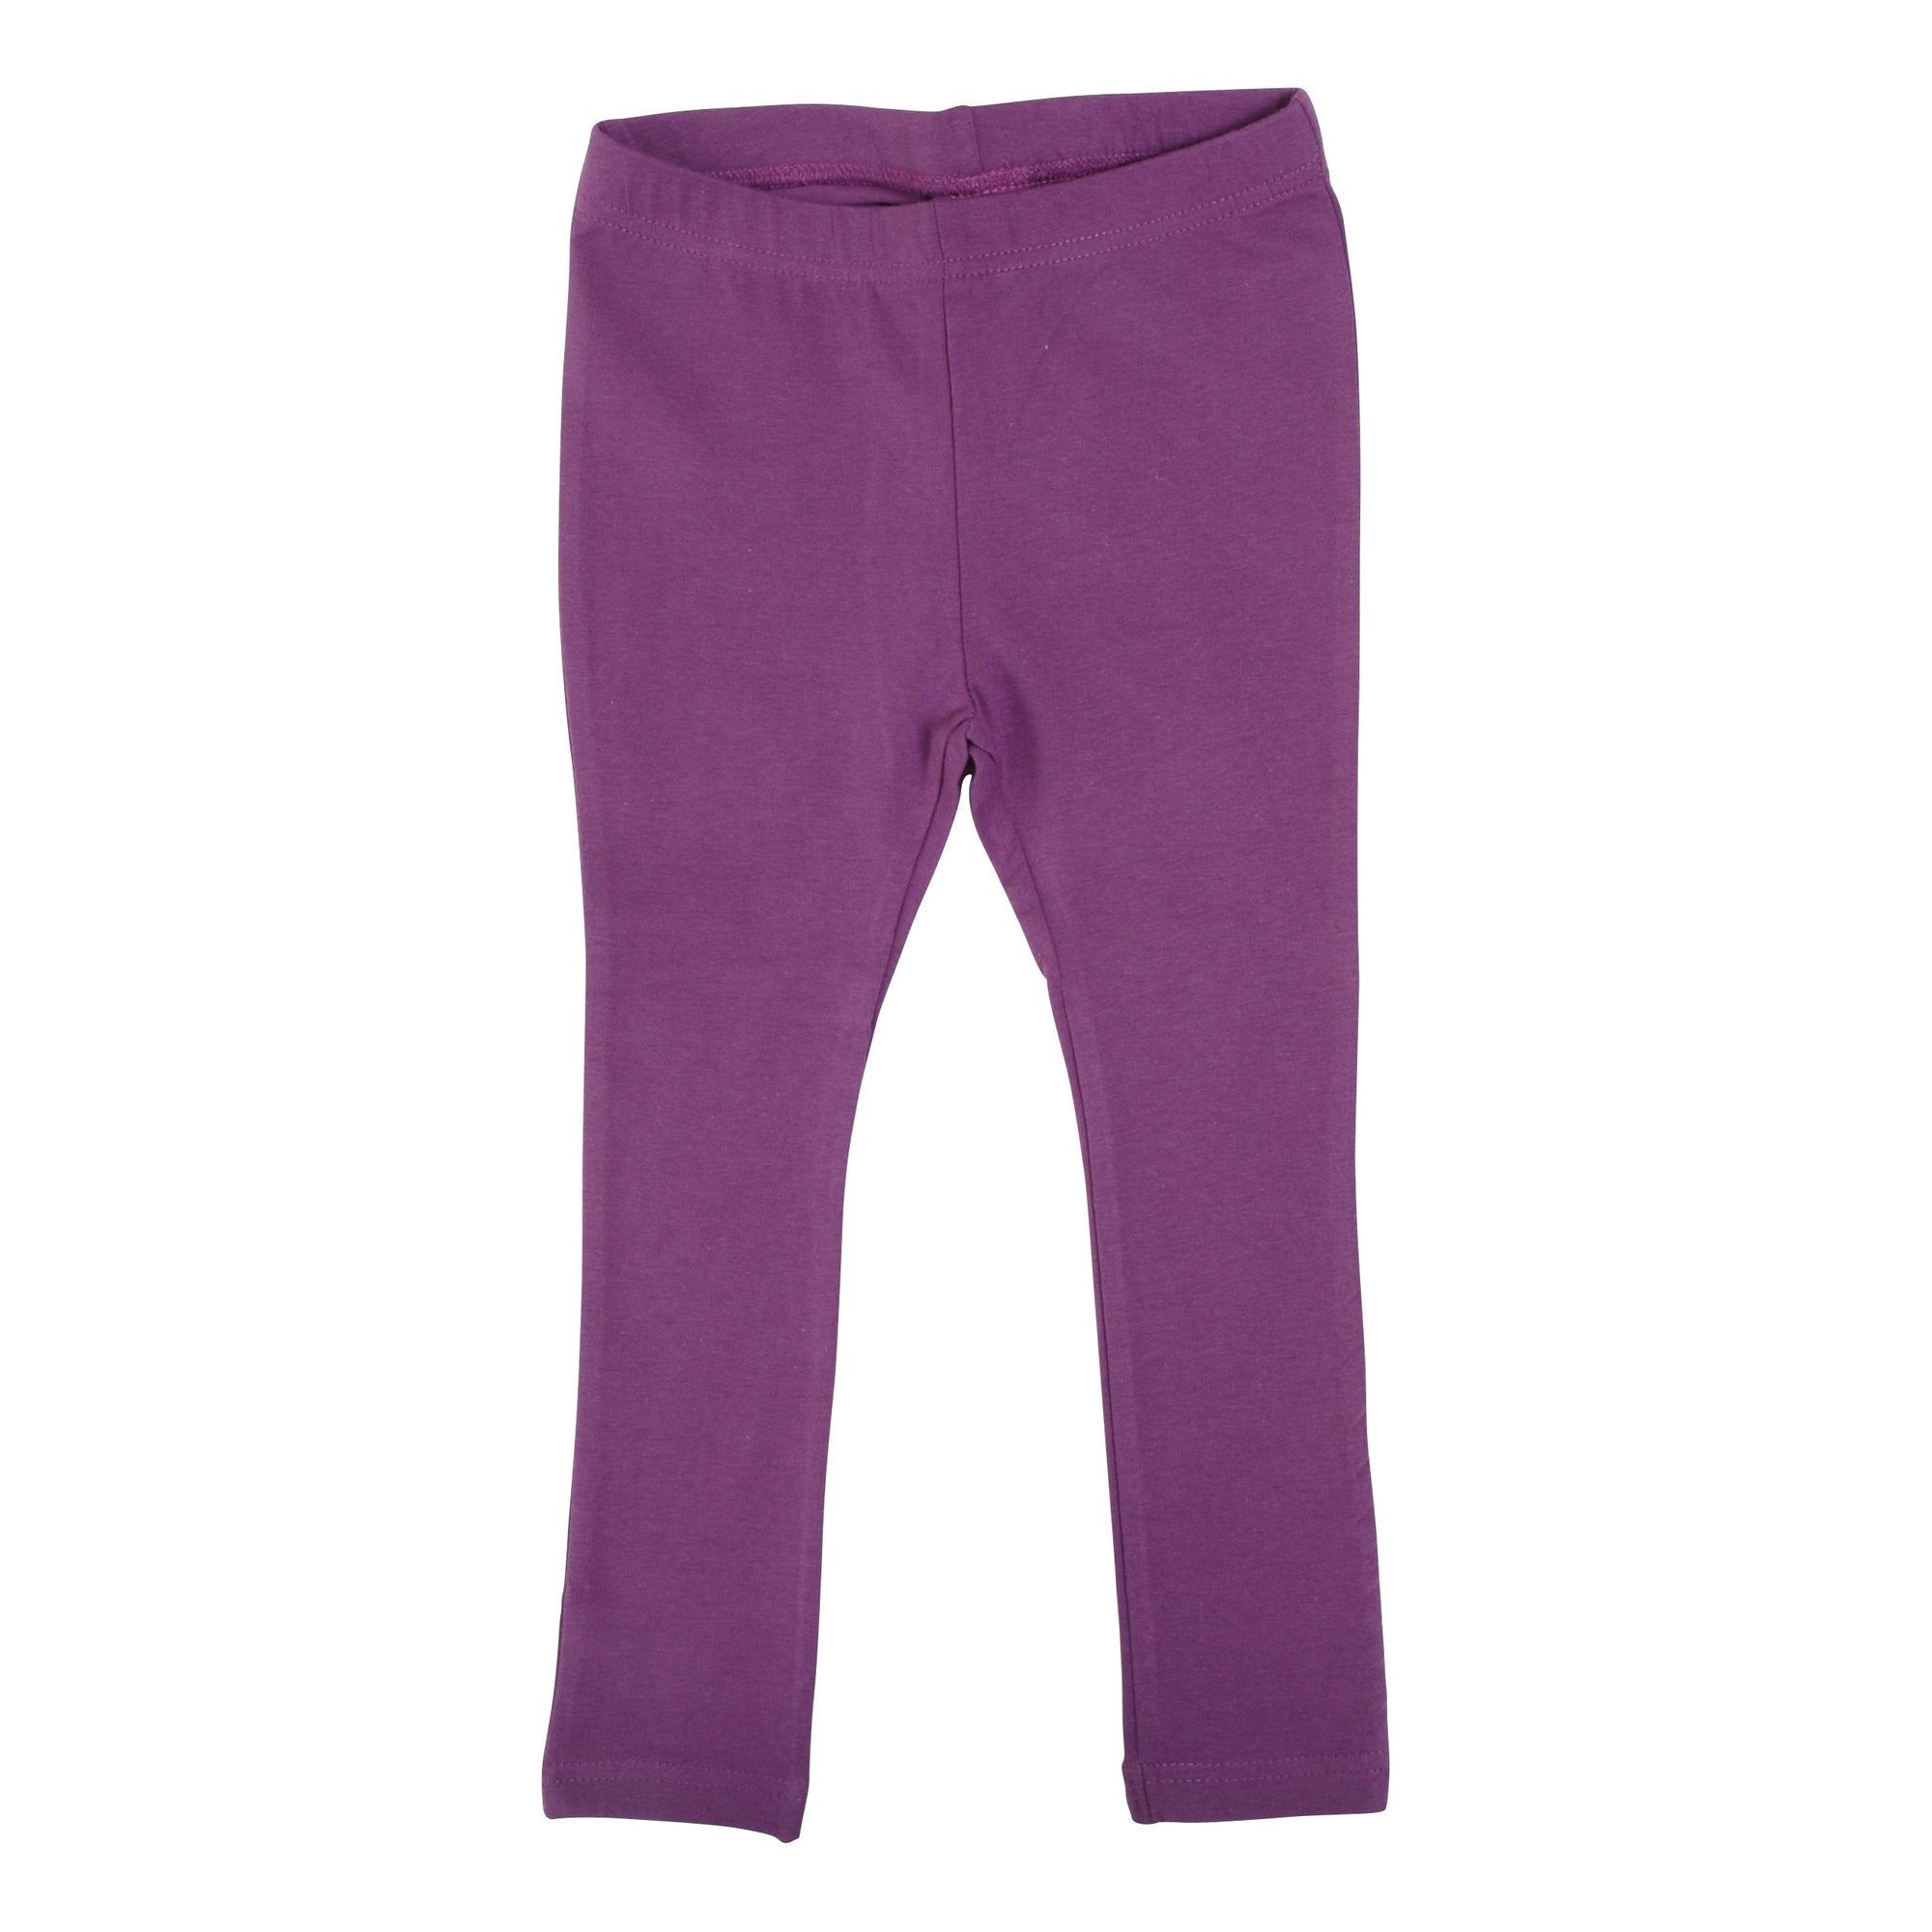 Crushed Grape Leggings - 2 Left Size 10-12 & 12-14 years-More Than A Fling-Modern Rascals